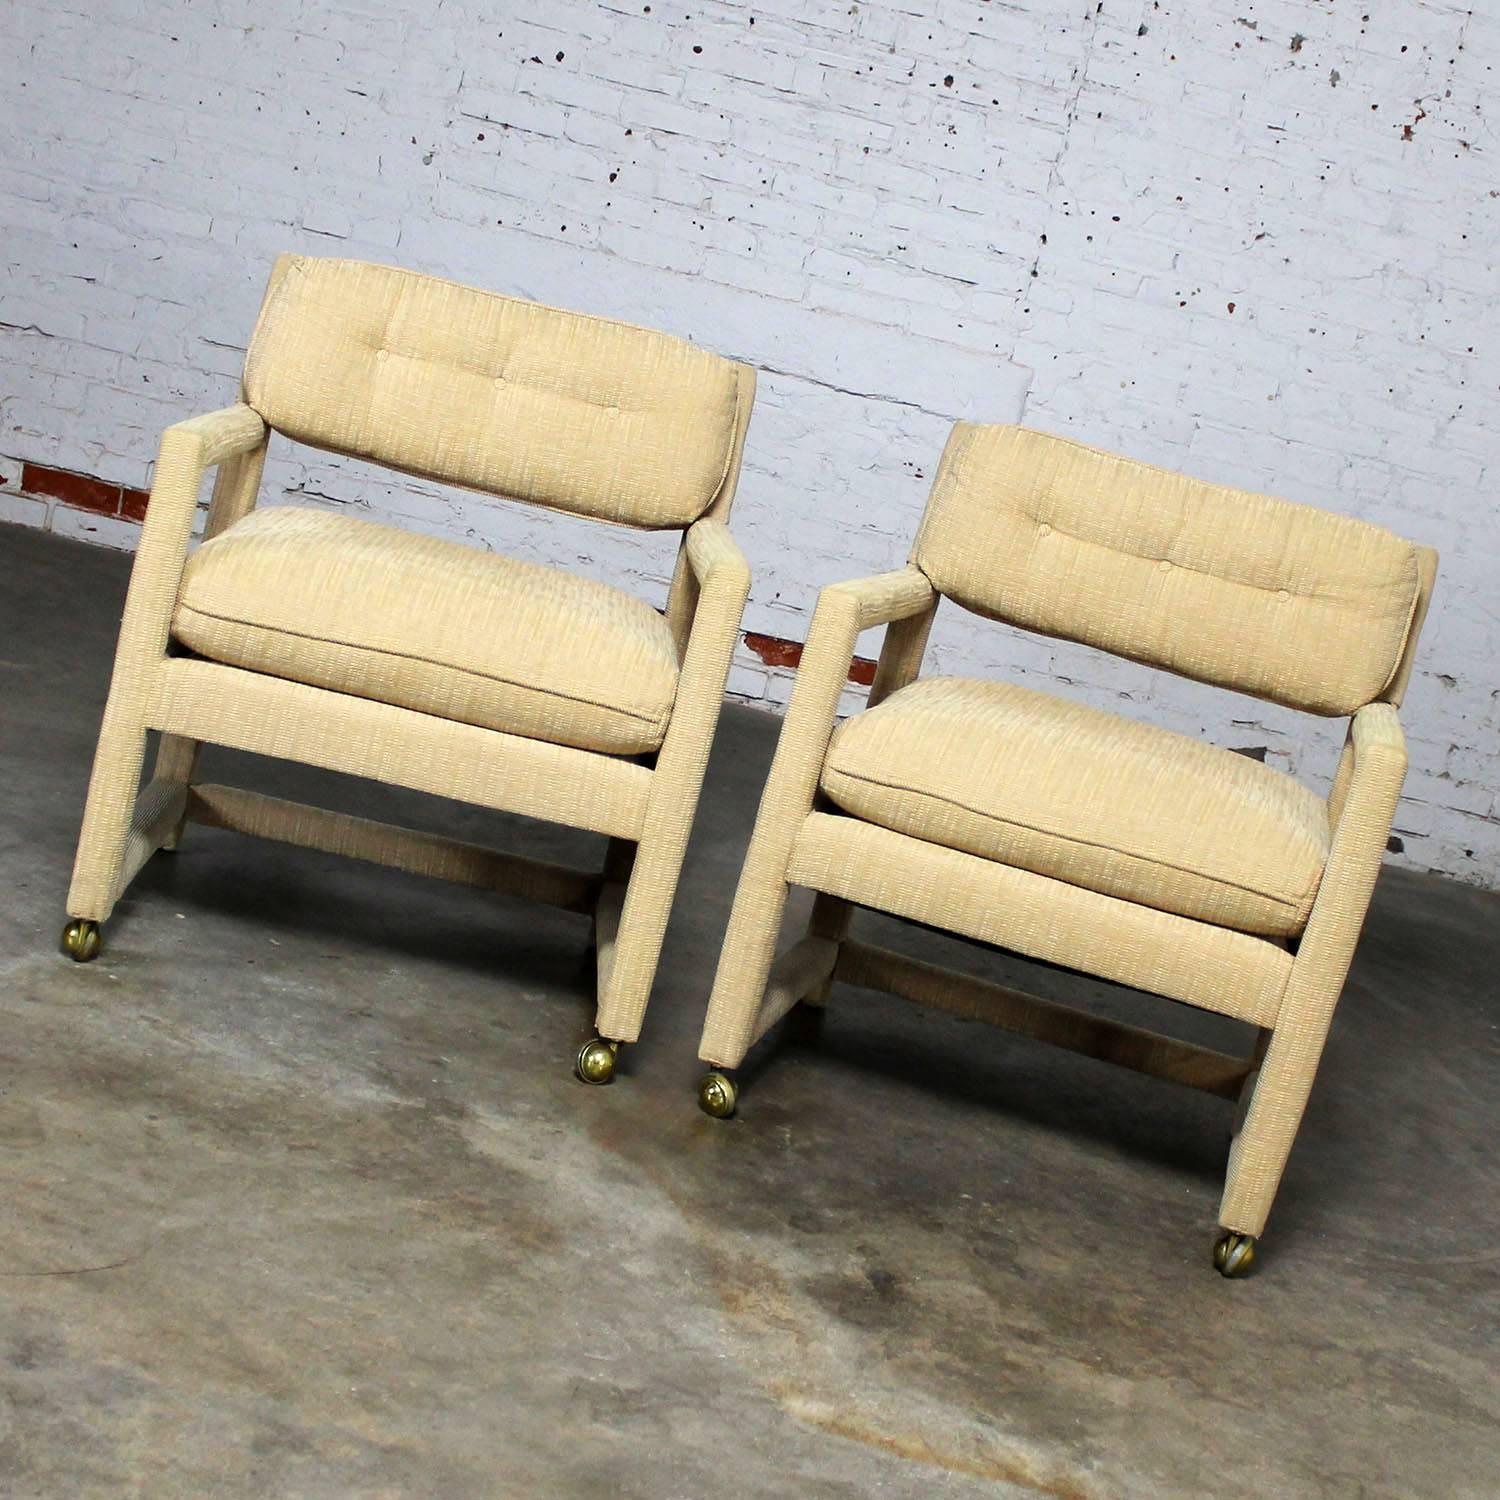 Handsome pair of circa 1970s Parsons style rolling club or armchairs in the style of Milo Baughman. This great pair are in wonderful vintage condition and ready to use. Their original tan brushed velvet type upholstery is in wonderful shape with no